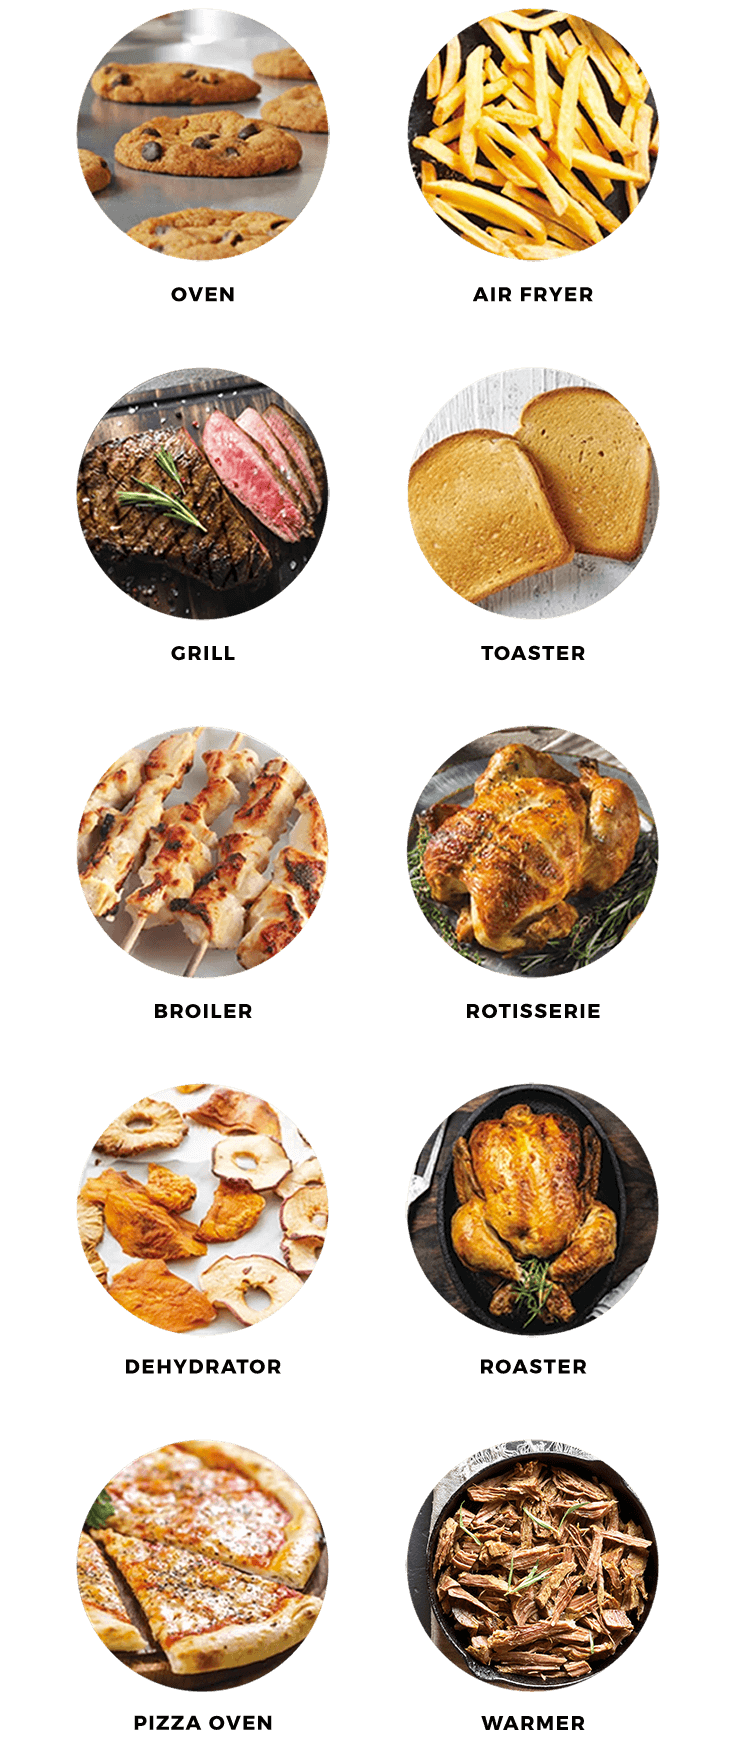 10-in-1: air fry, grill, bake, toast, roast, braise, sear, rotisserie, dehydrate, and broil